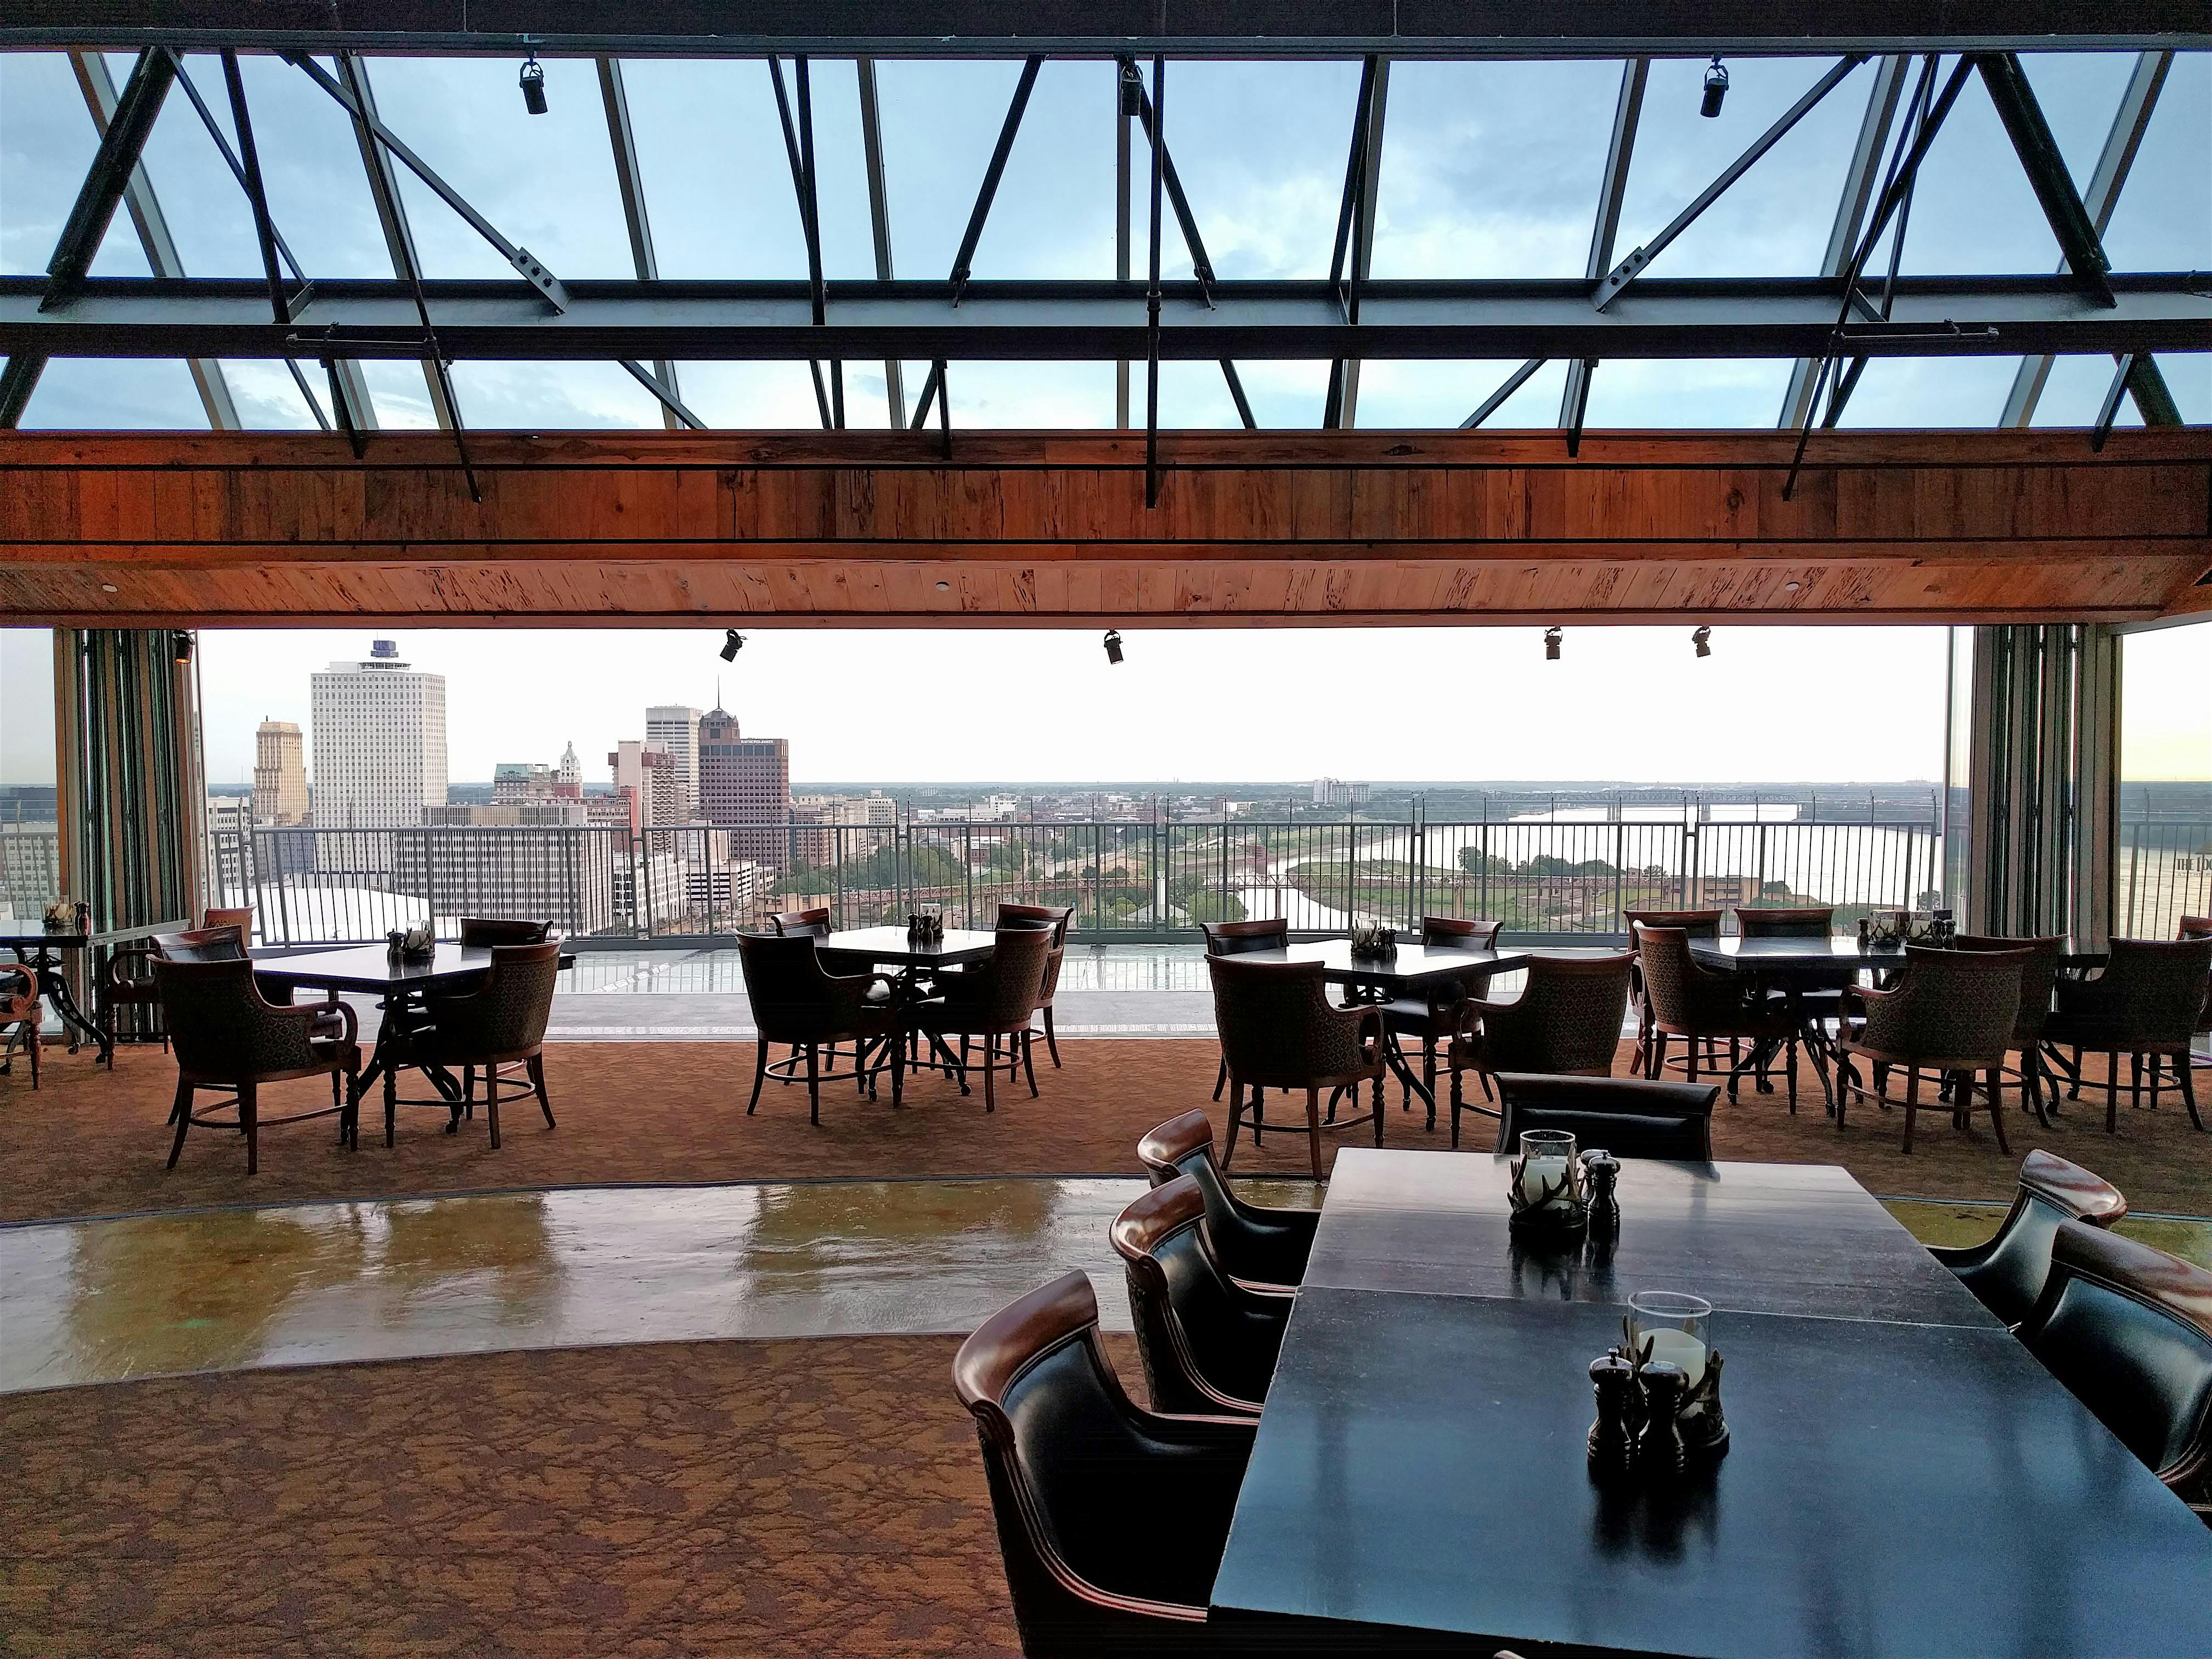 NanaWall SL70 opening glass wall systems at The Lookout Memphis